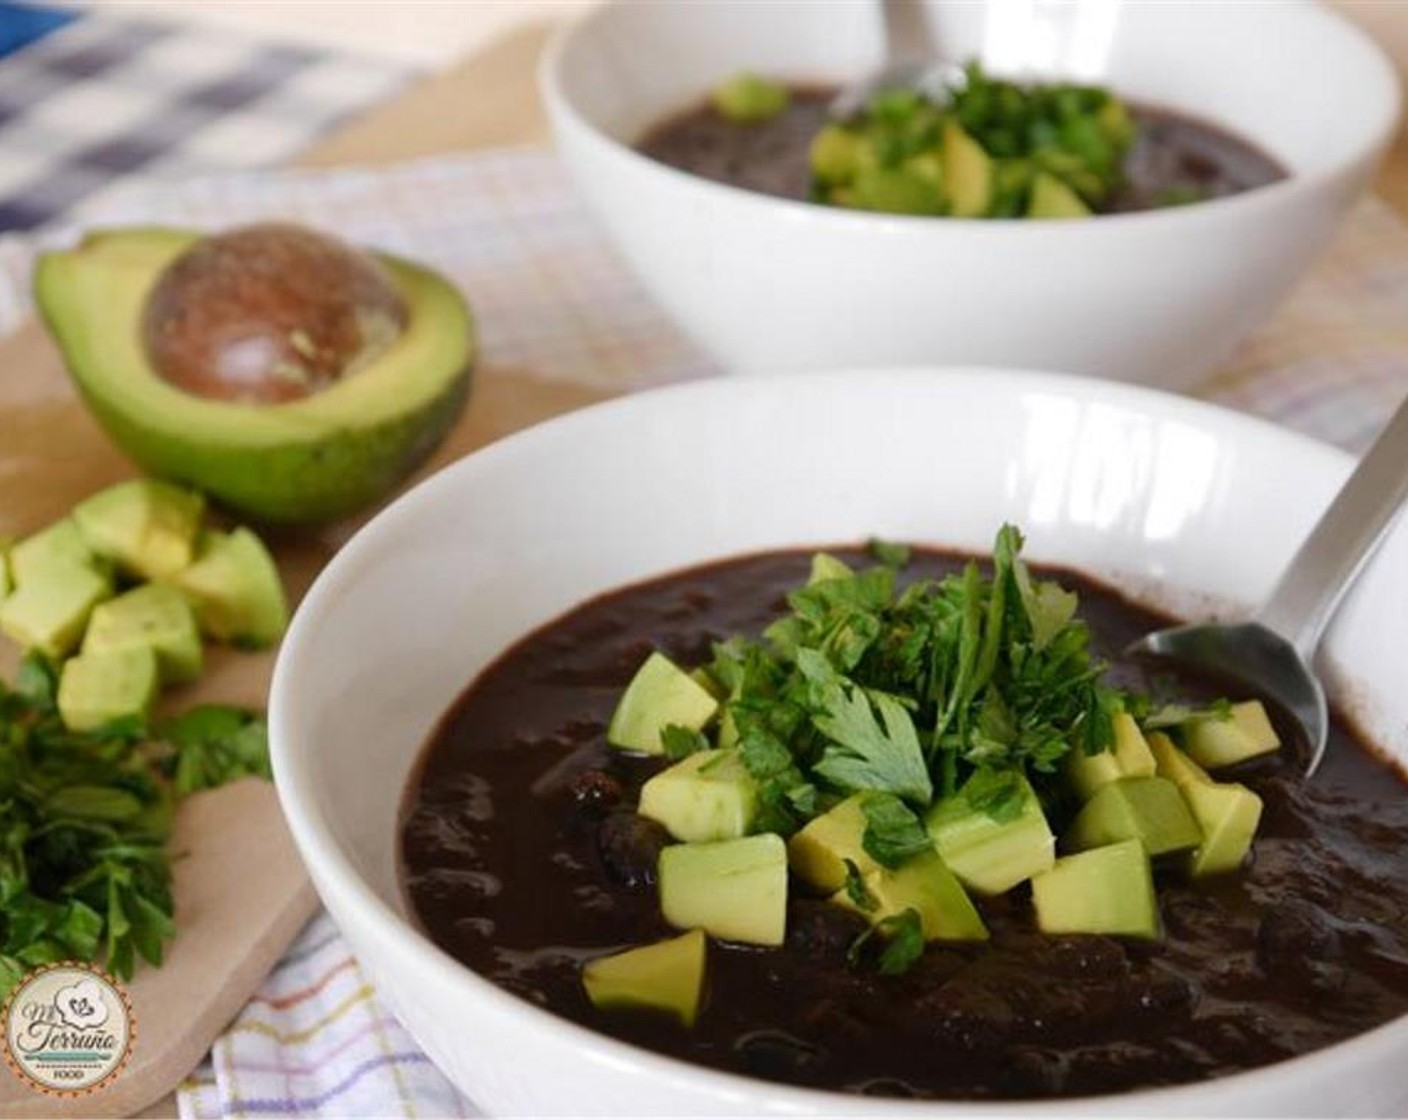 step 6 Serving options: Serve black bean soup with white rice or some white cheese. Alternatively, add avocado pieces, a sprinkle of Ground Black Pepper (1/2 tsp), white cheese. Traditionally, we also serve it with arepas.